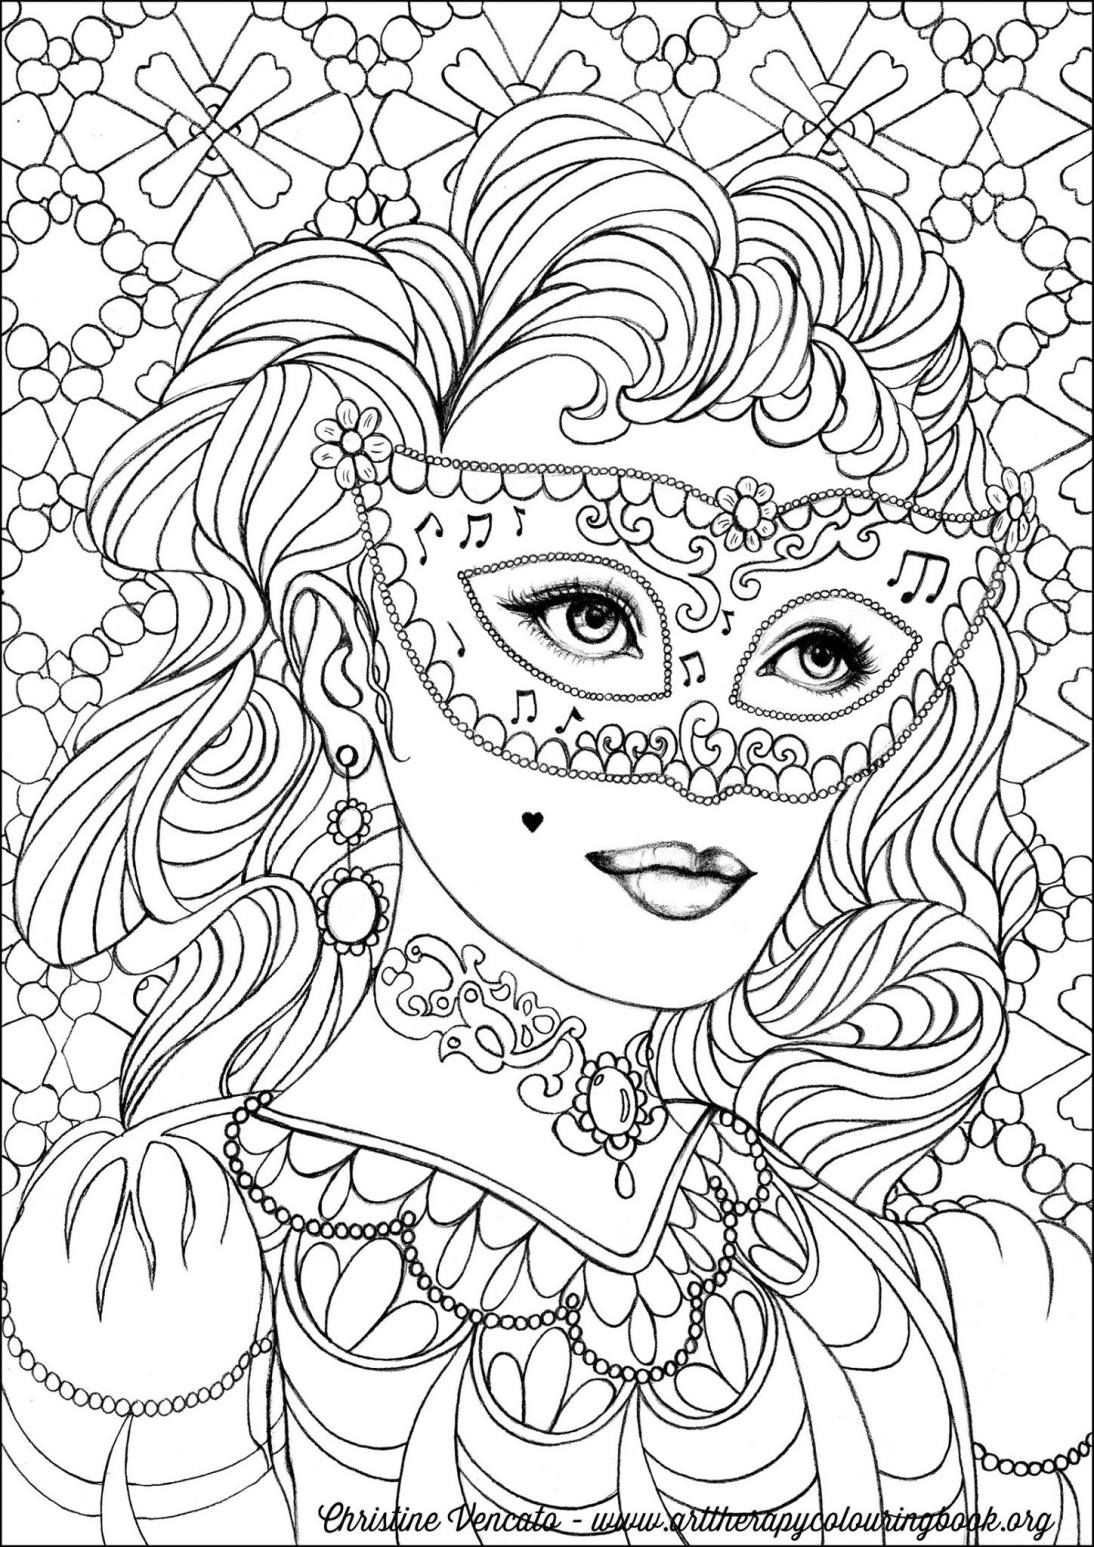 Free Coloring Pages For Adults Printable
 Free Coloring Page From Adult Coloring Worldwide Art by